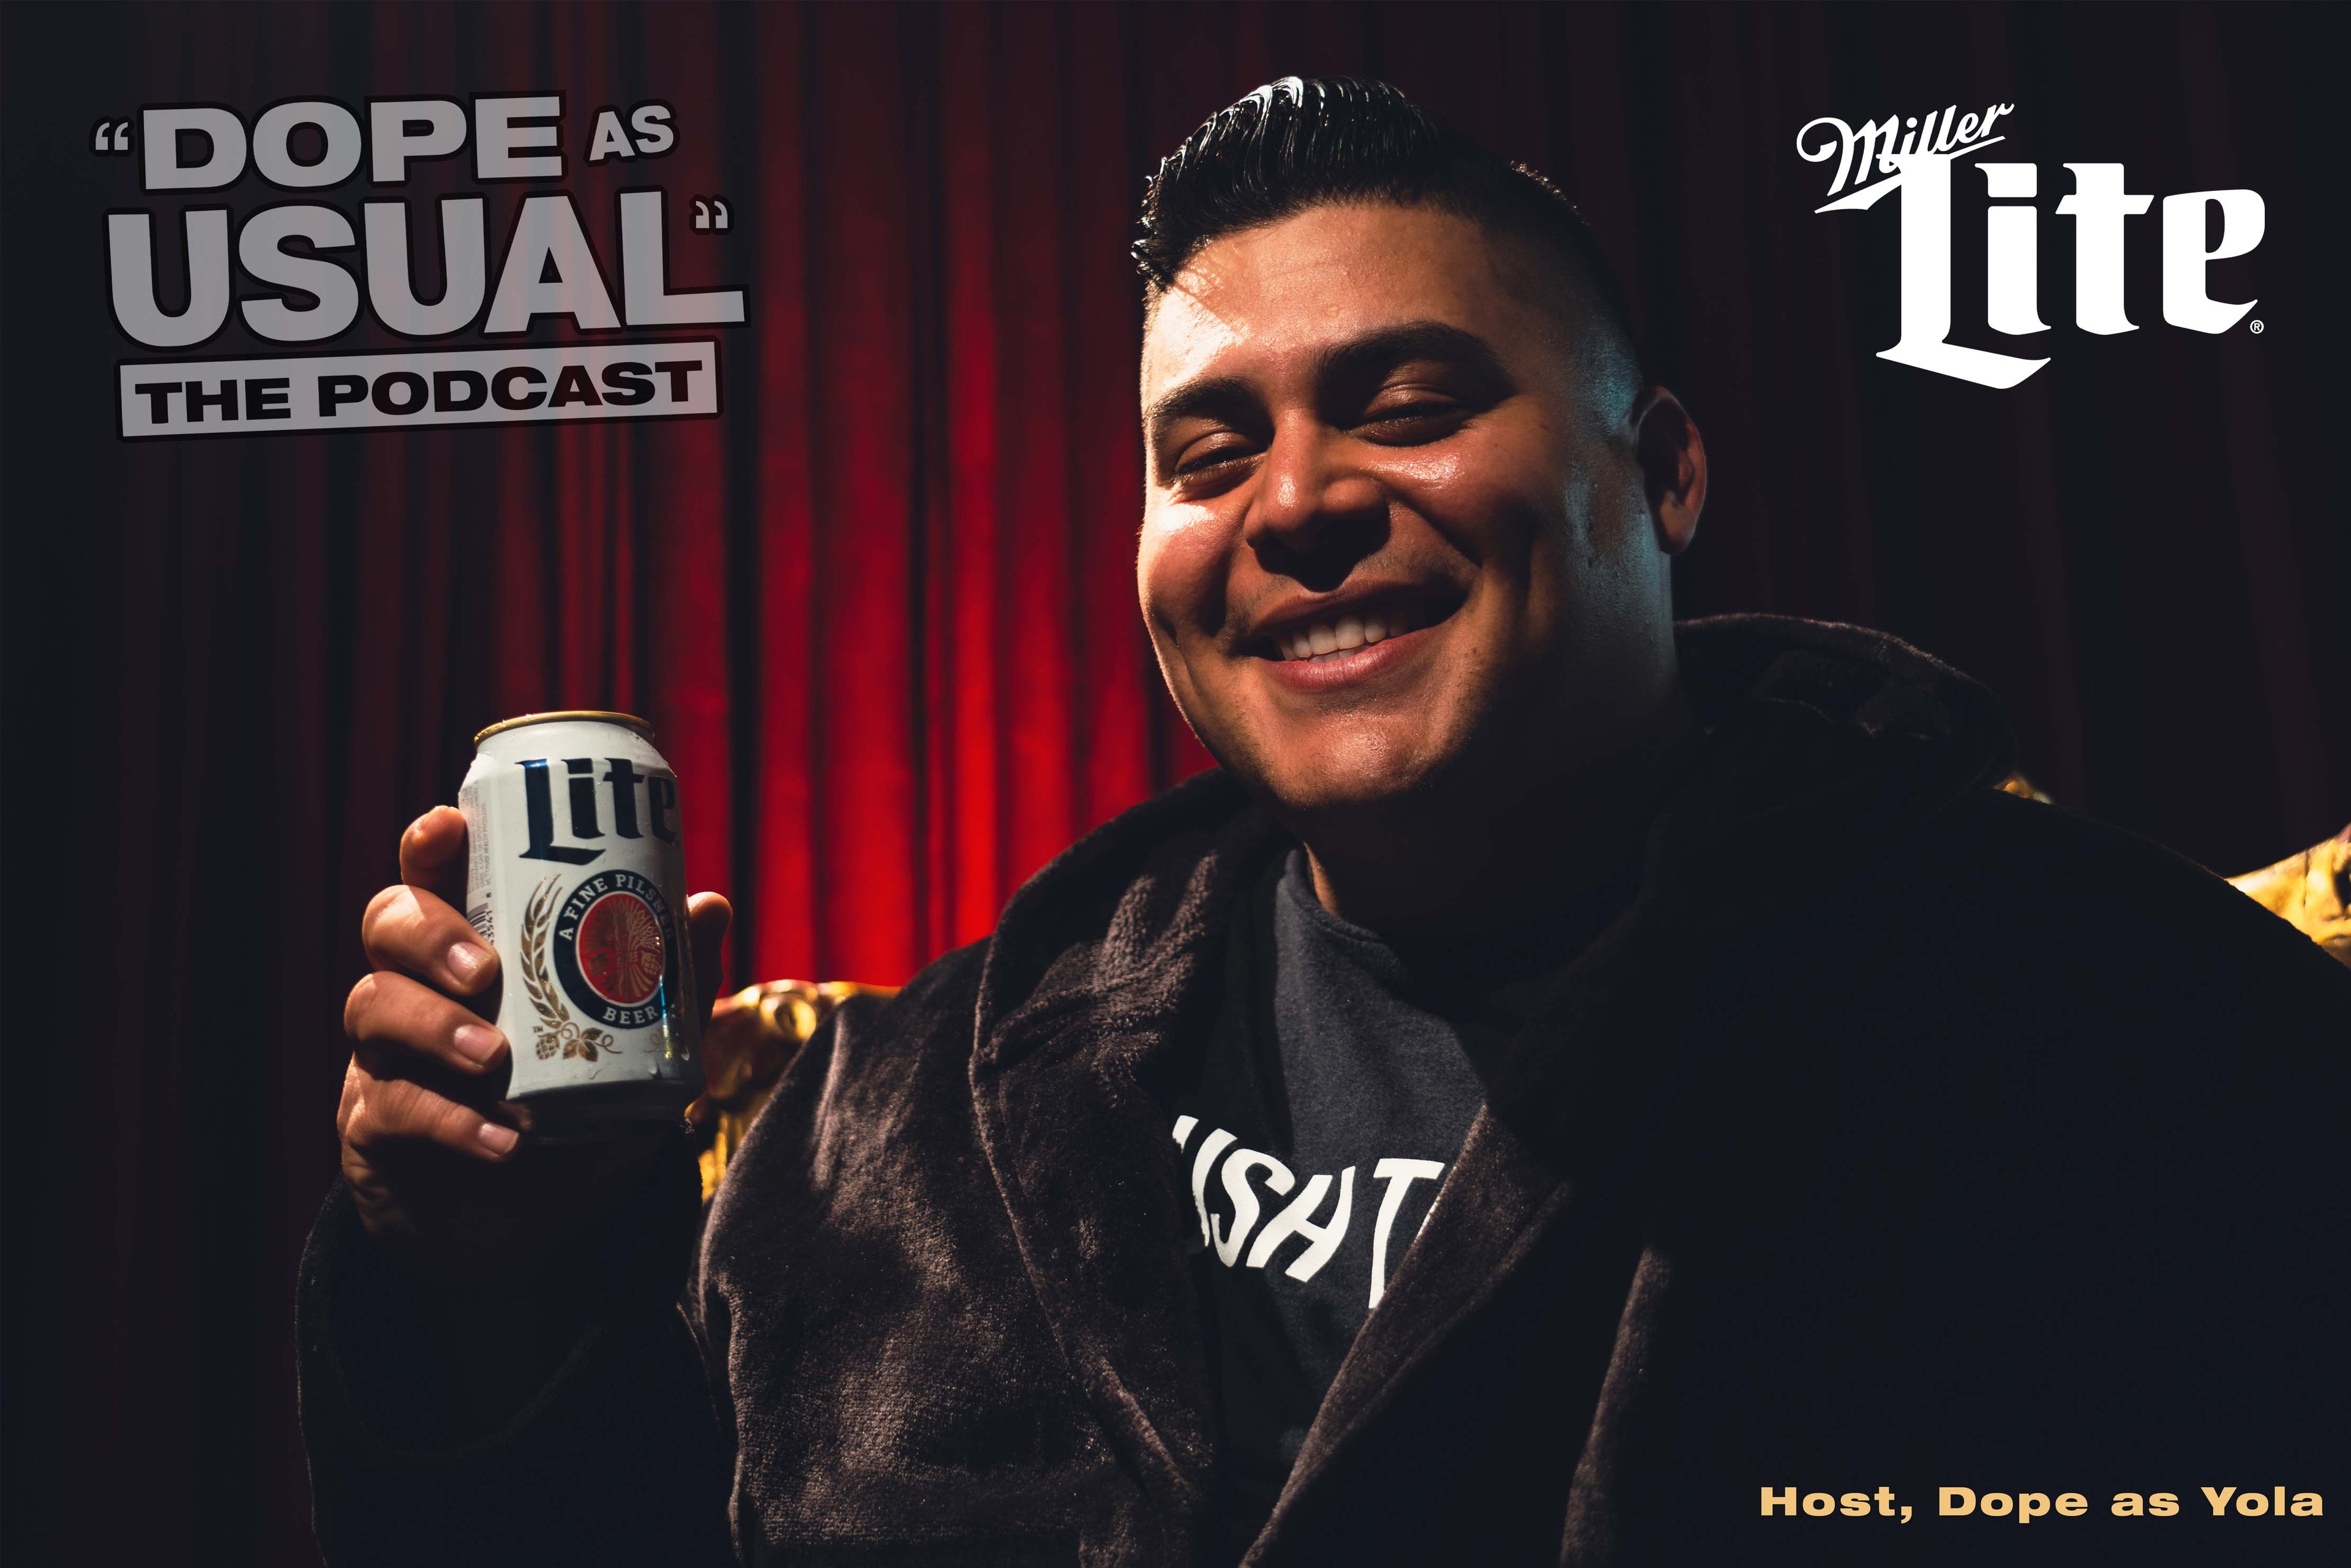 Miller Lite Chooses 'DOPE AS USUAL' Podcast as 2022 Brand Ambassadors